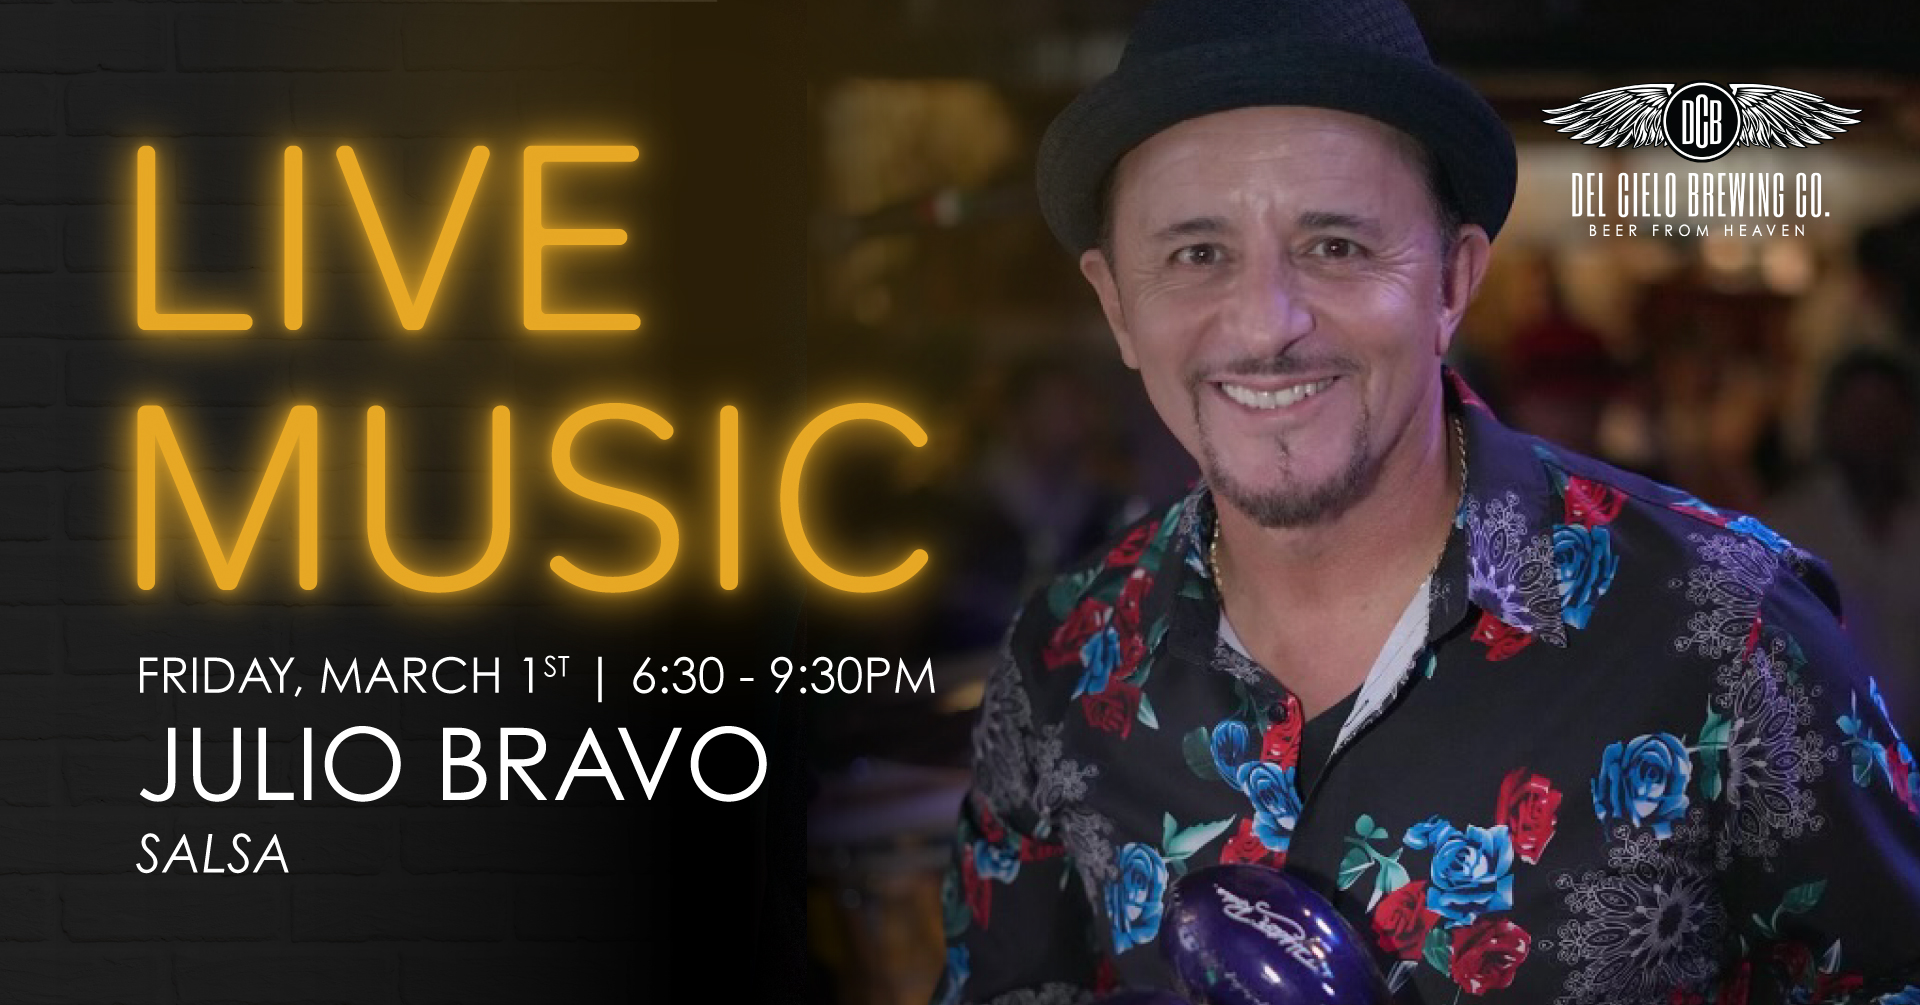 Live Music poster for Julio Bravo on March 1st, 6:30-9:30PM.